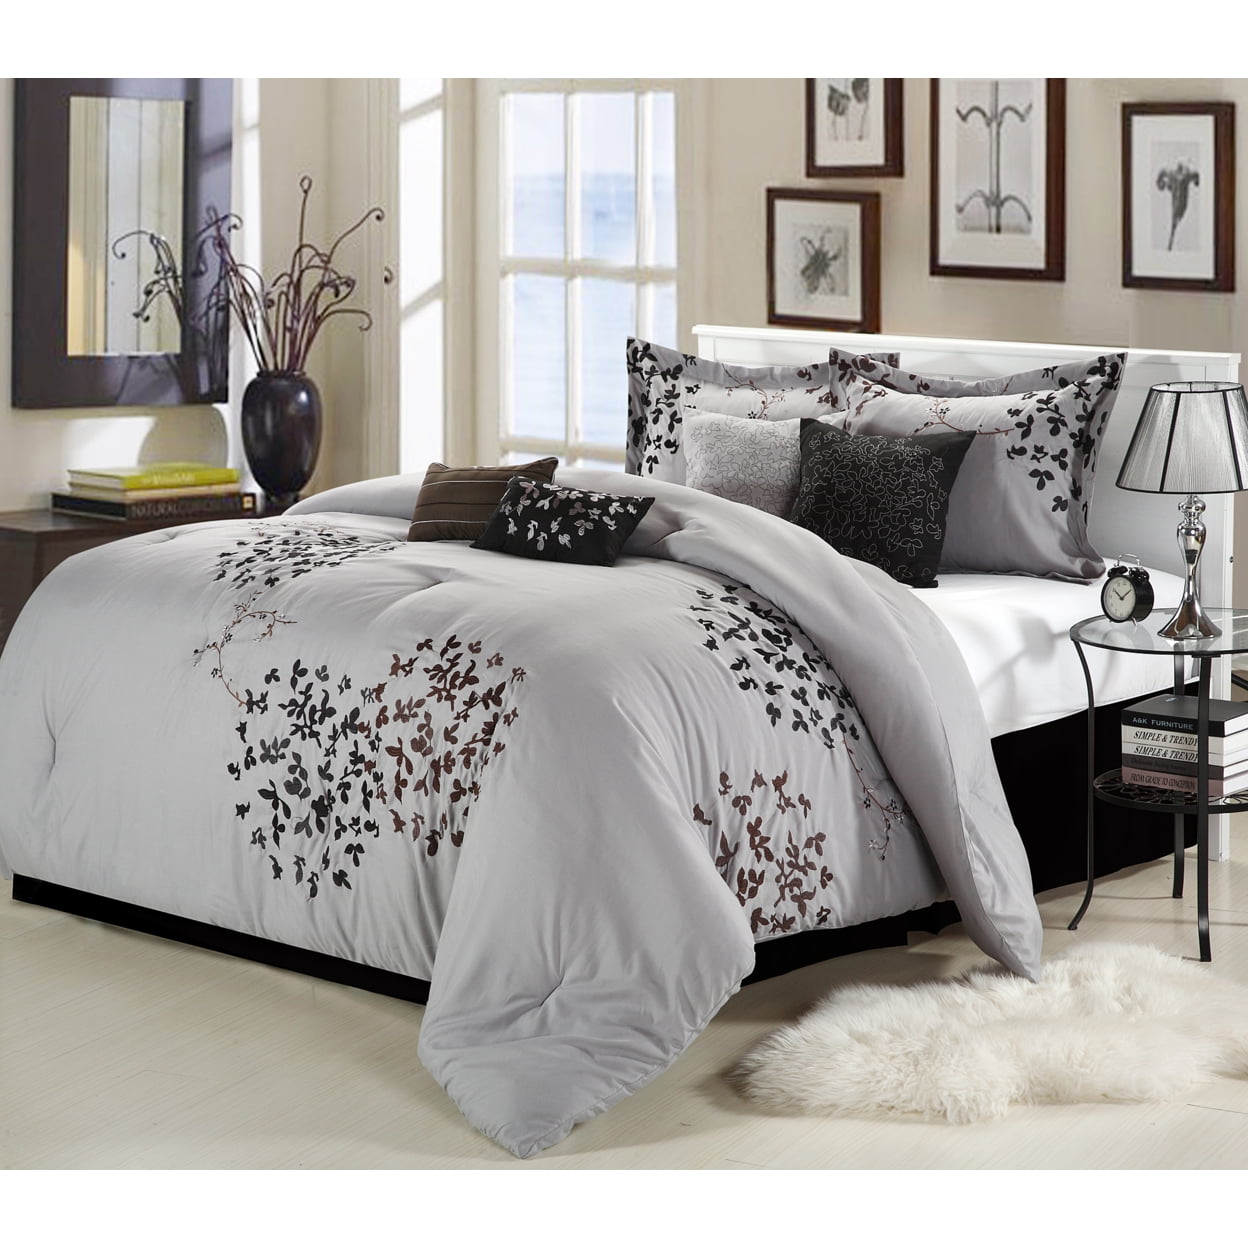 25cq106-us Cheila Embroidered Comforter Set - Silver - Queen - 8 Piece